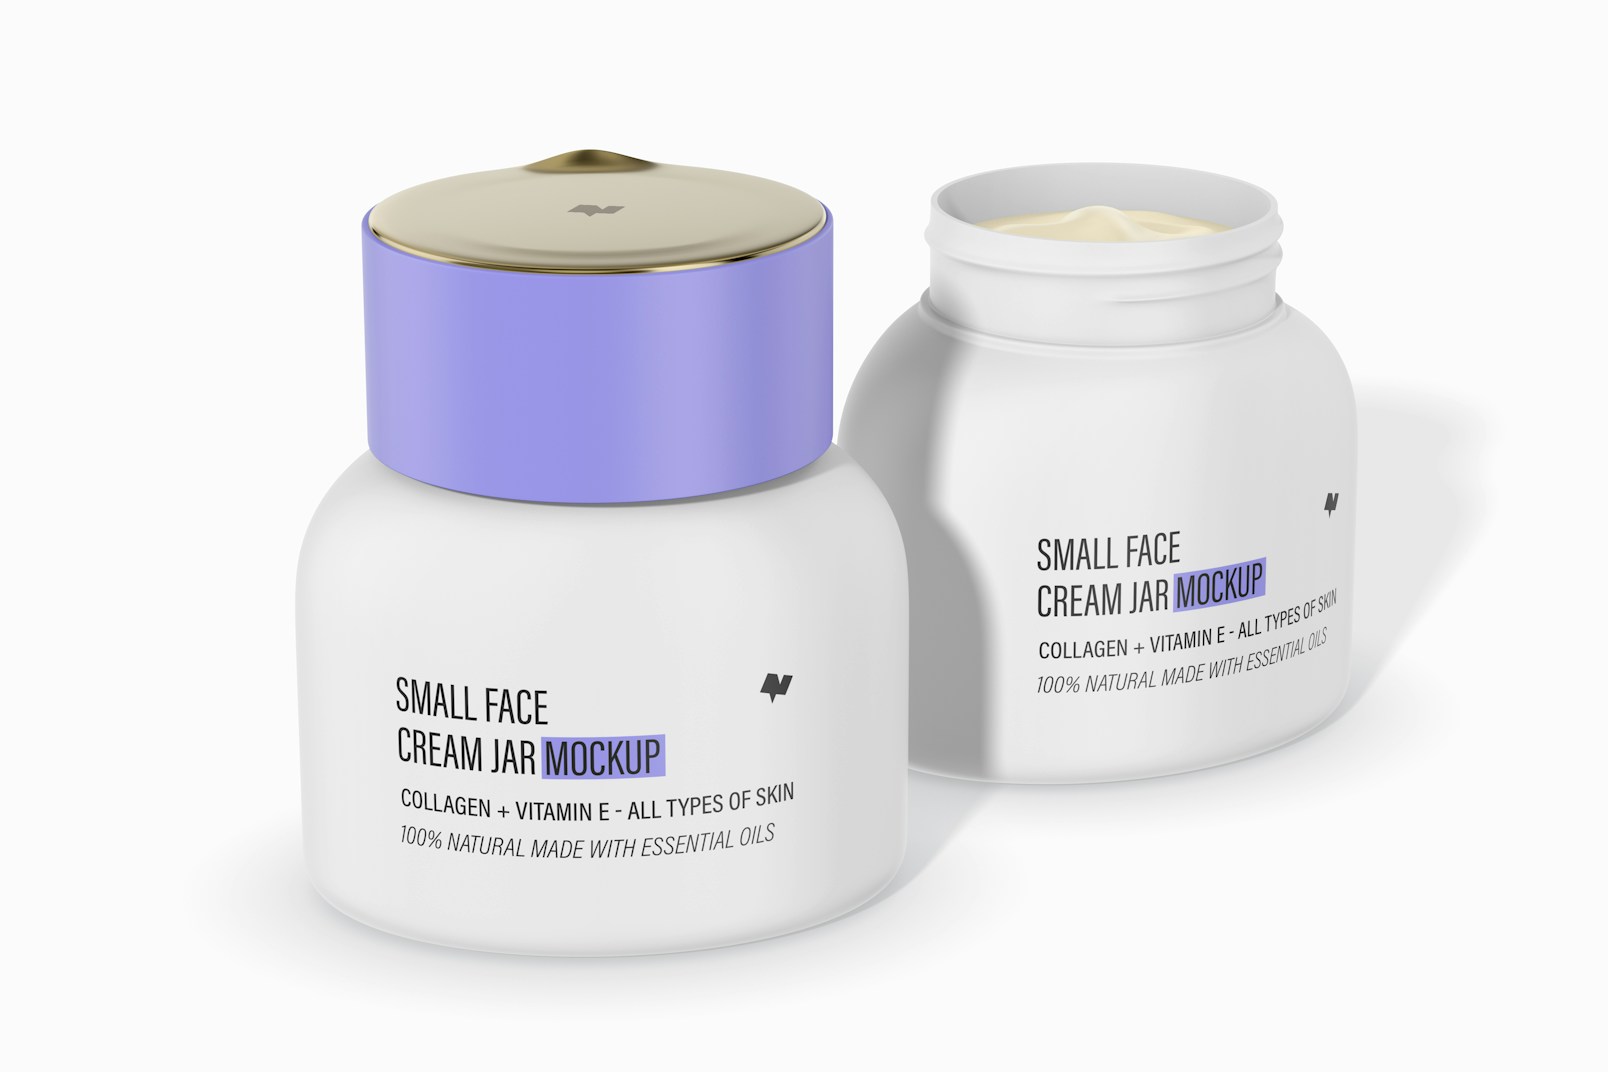 Small Face Cream Jars Mockup, Opened and Closed